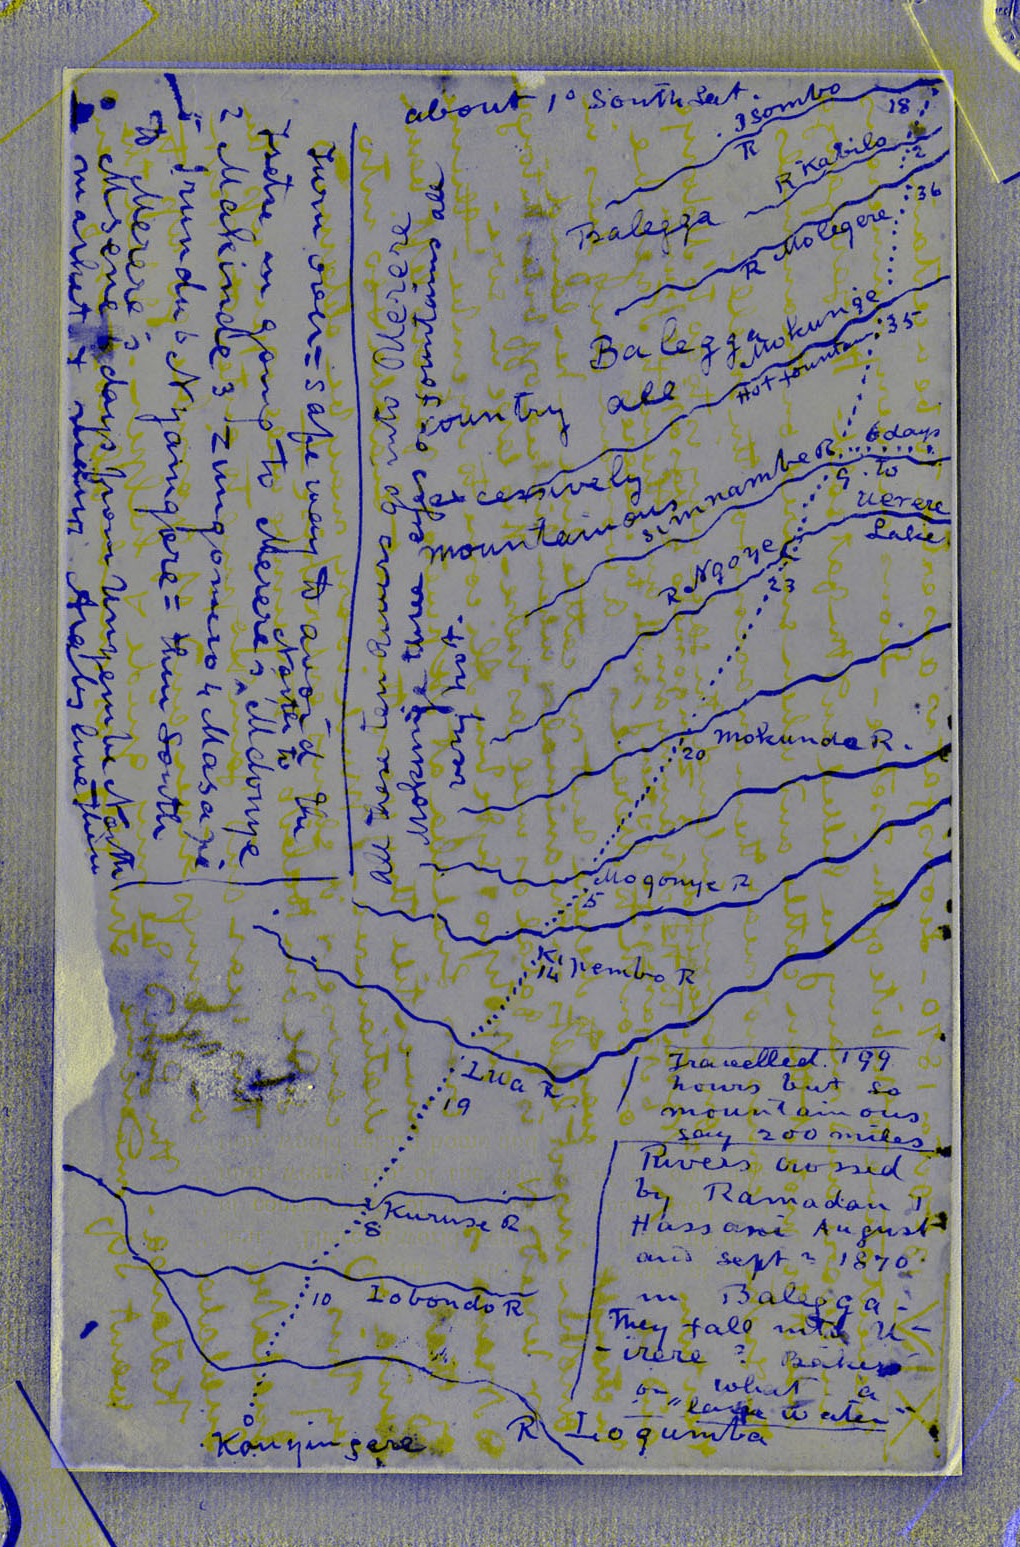 A spectral image of a page of the 1870 Field Diary (Livingstone 1870f:[XIV v.2] pseudo_v4_BY). Copyright David Livingstone Centre. Creative Commons Attribution-NonCommercial 3.0 Unported (https://creativecommons.org/licenses/by-nc/3.0/).